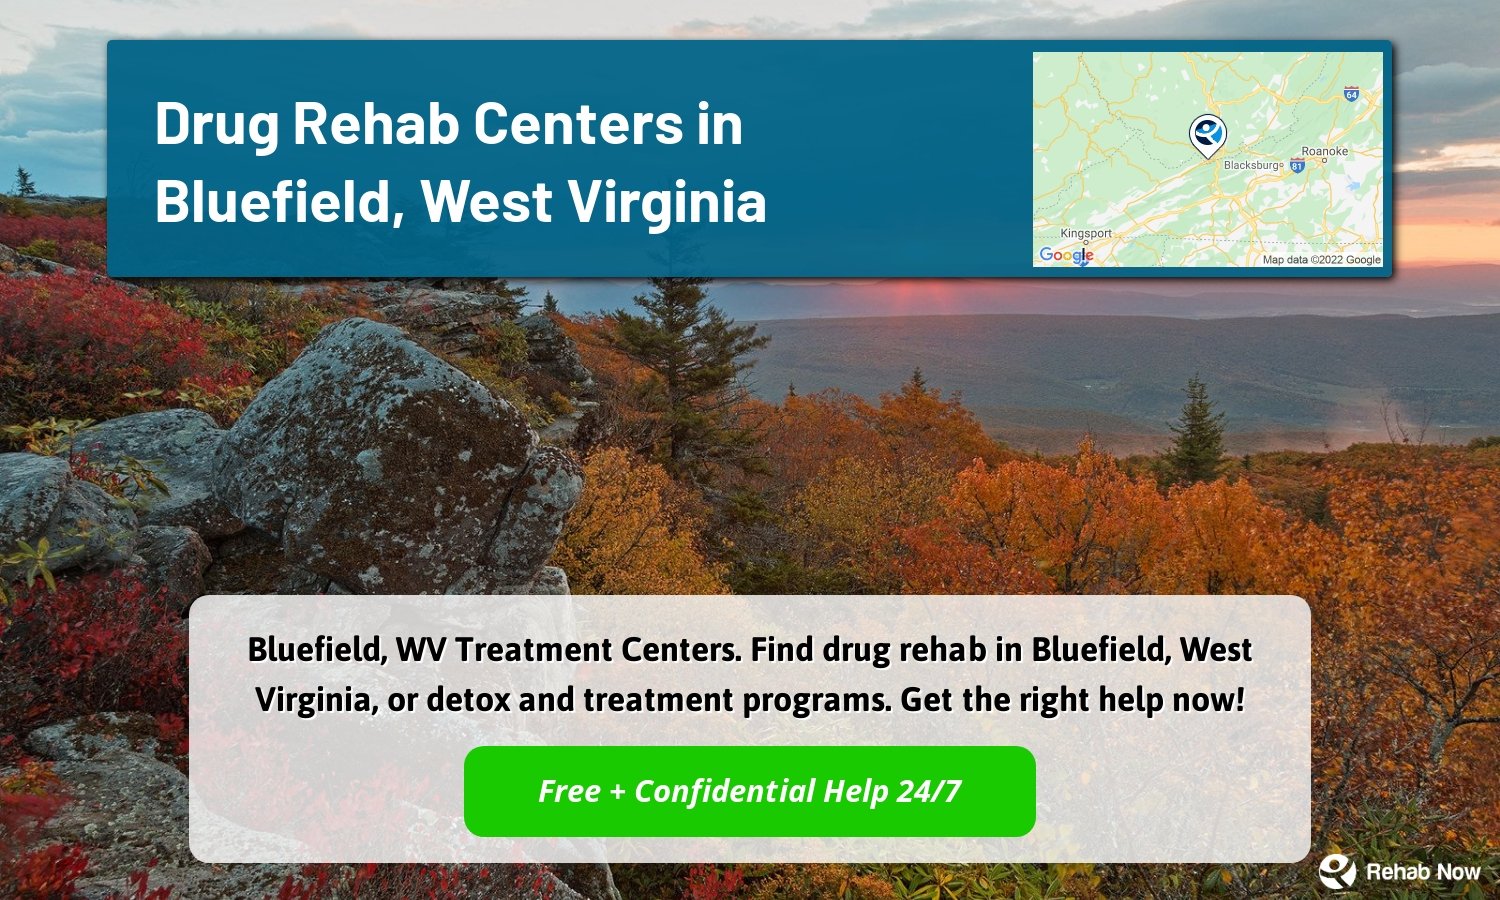 Bluefield, WV Treatment Centers. Find drug rehab in Bluefield, West Virginia, or detox and treatment programs. Get the right help now!